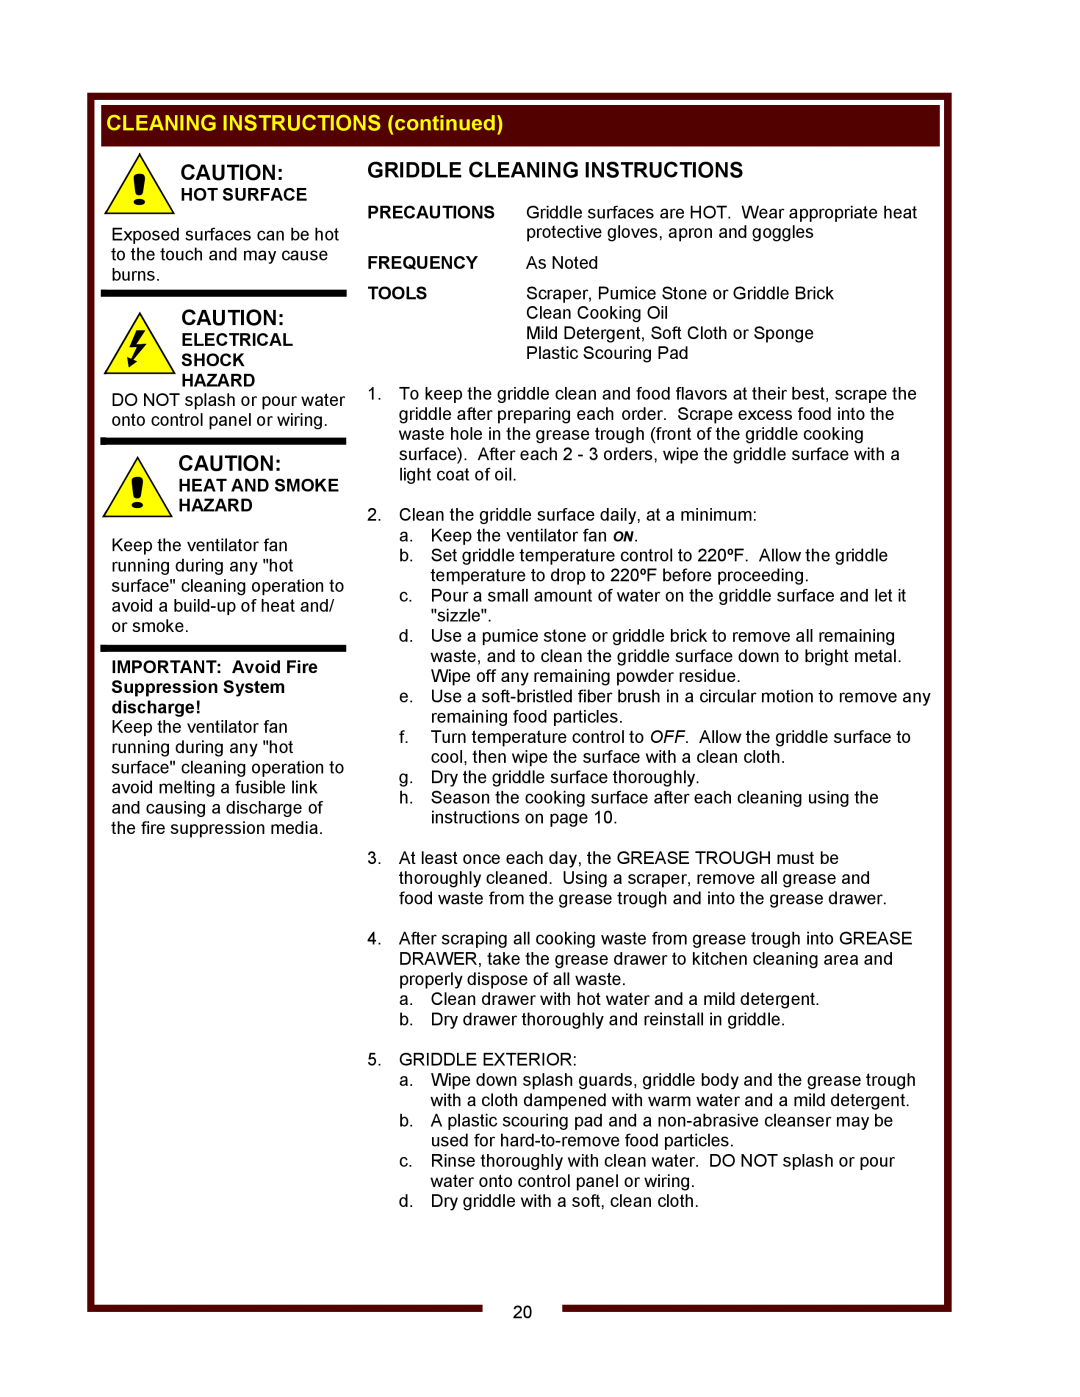 Wells WV-2HGRW Griddle Cleaning Instructions, CLEANING INSTRUCTIONS continued, Hot Surface, Electrical Shock Hazard, Tools 